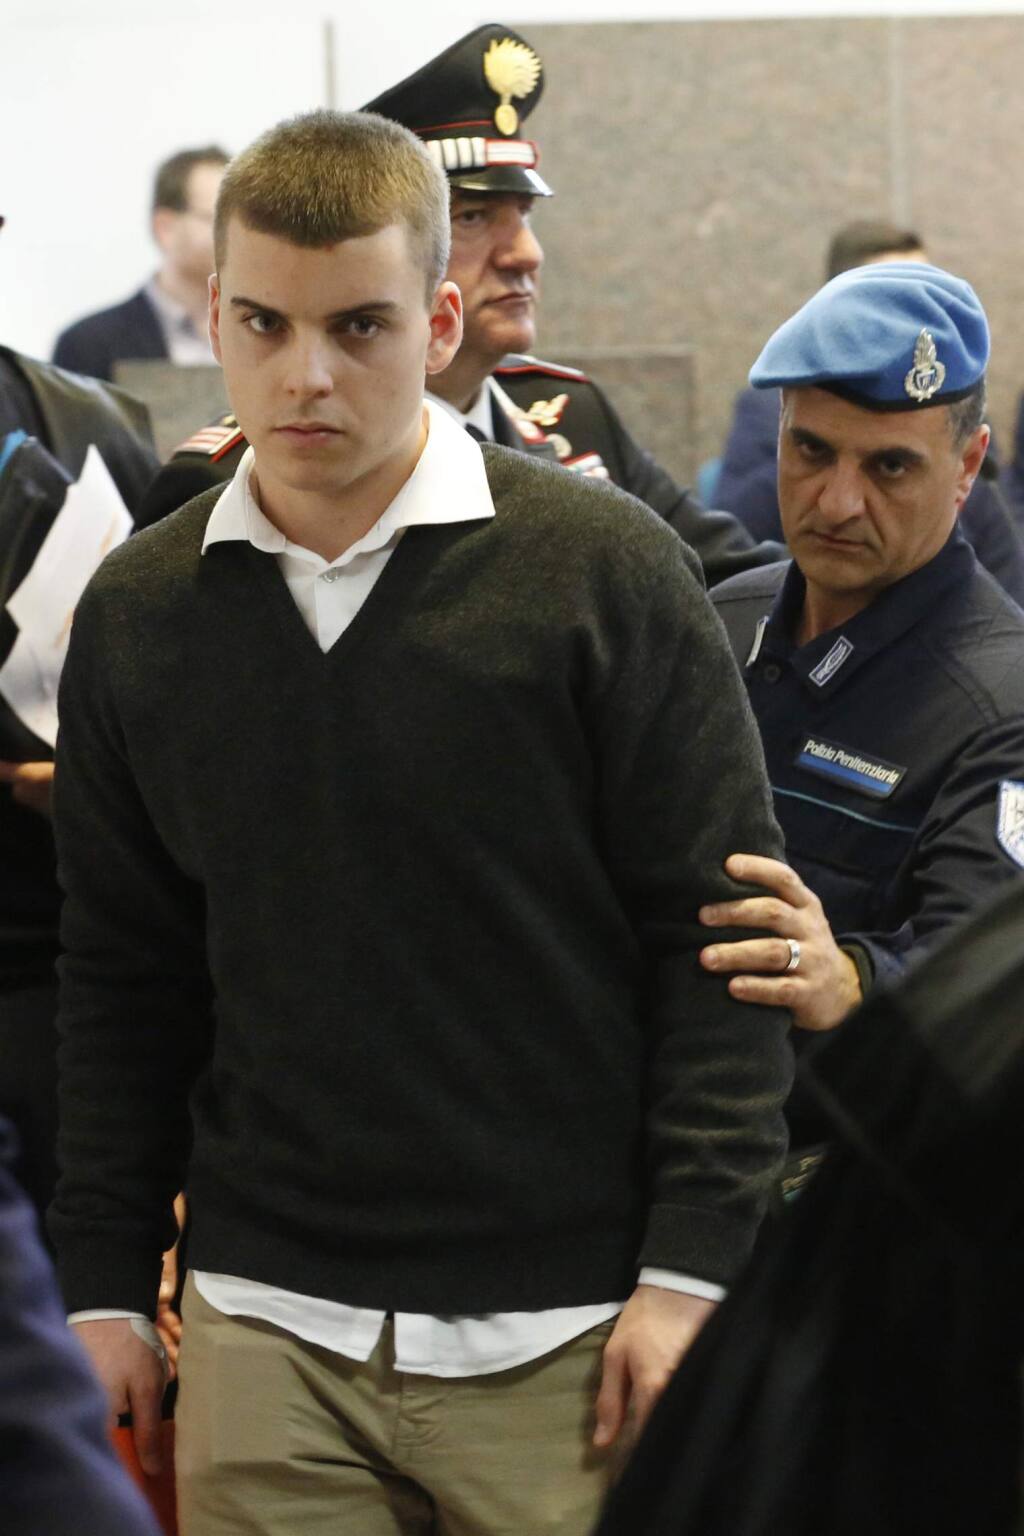 Trial begins for jailed Bay Area teens accused of killing policeman in Italy